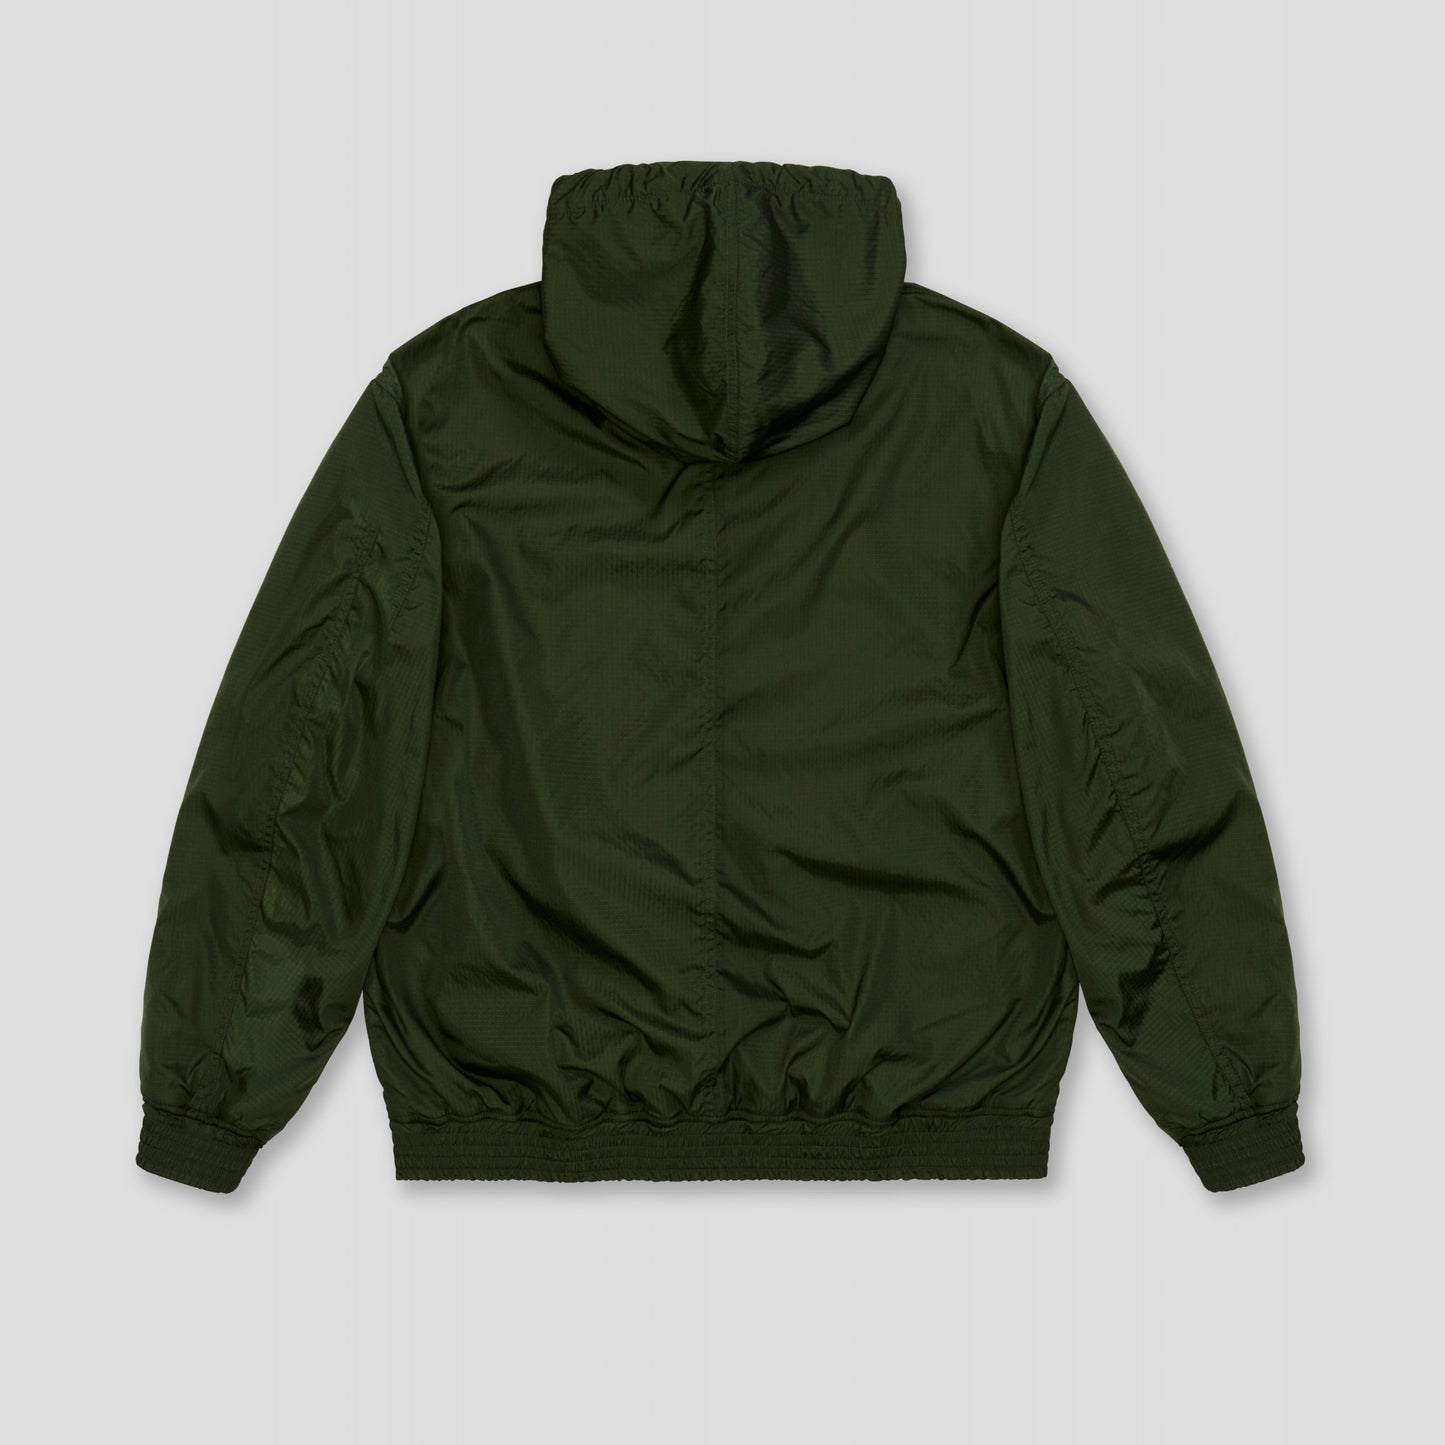 GREEN HYBRID HOODIE IN RECYCLED RIPSTOP NYLON WITH BLACK ORGANIC COTTON FLEECE LINING